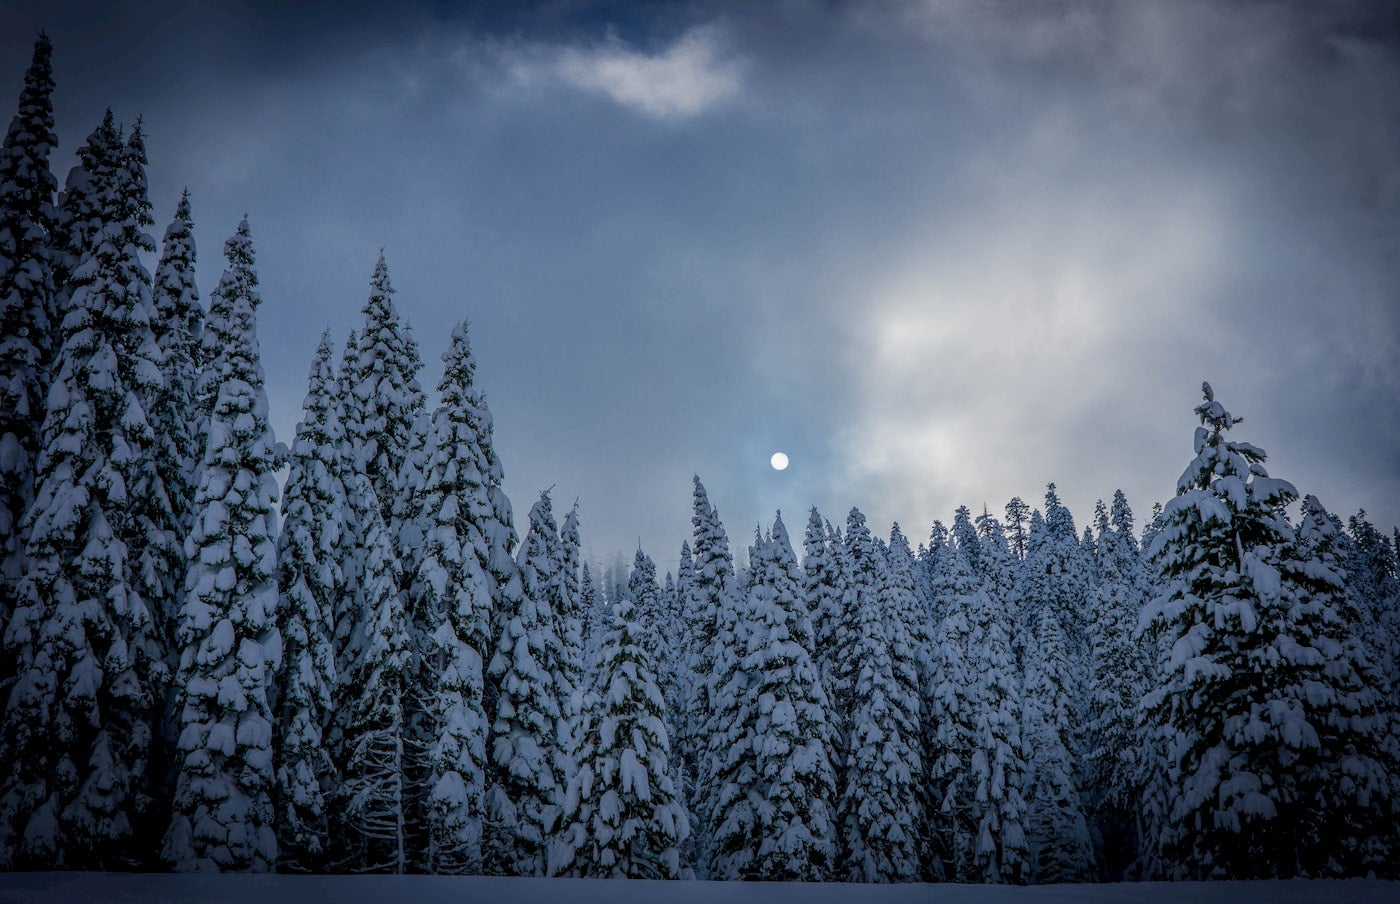 Snow covered trees with a clear full moon above them.